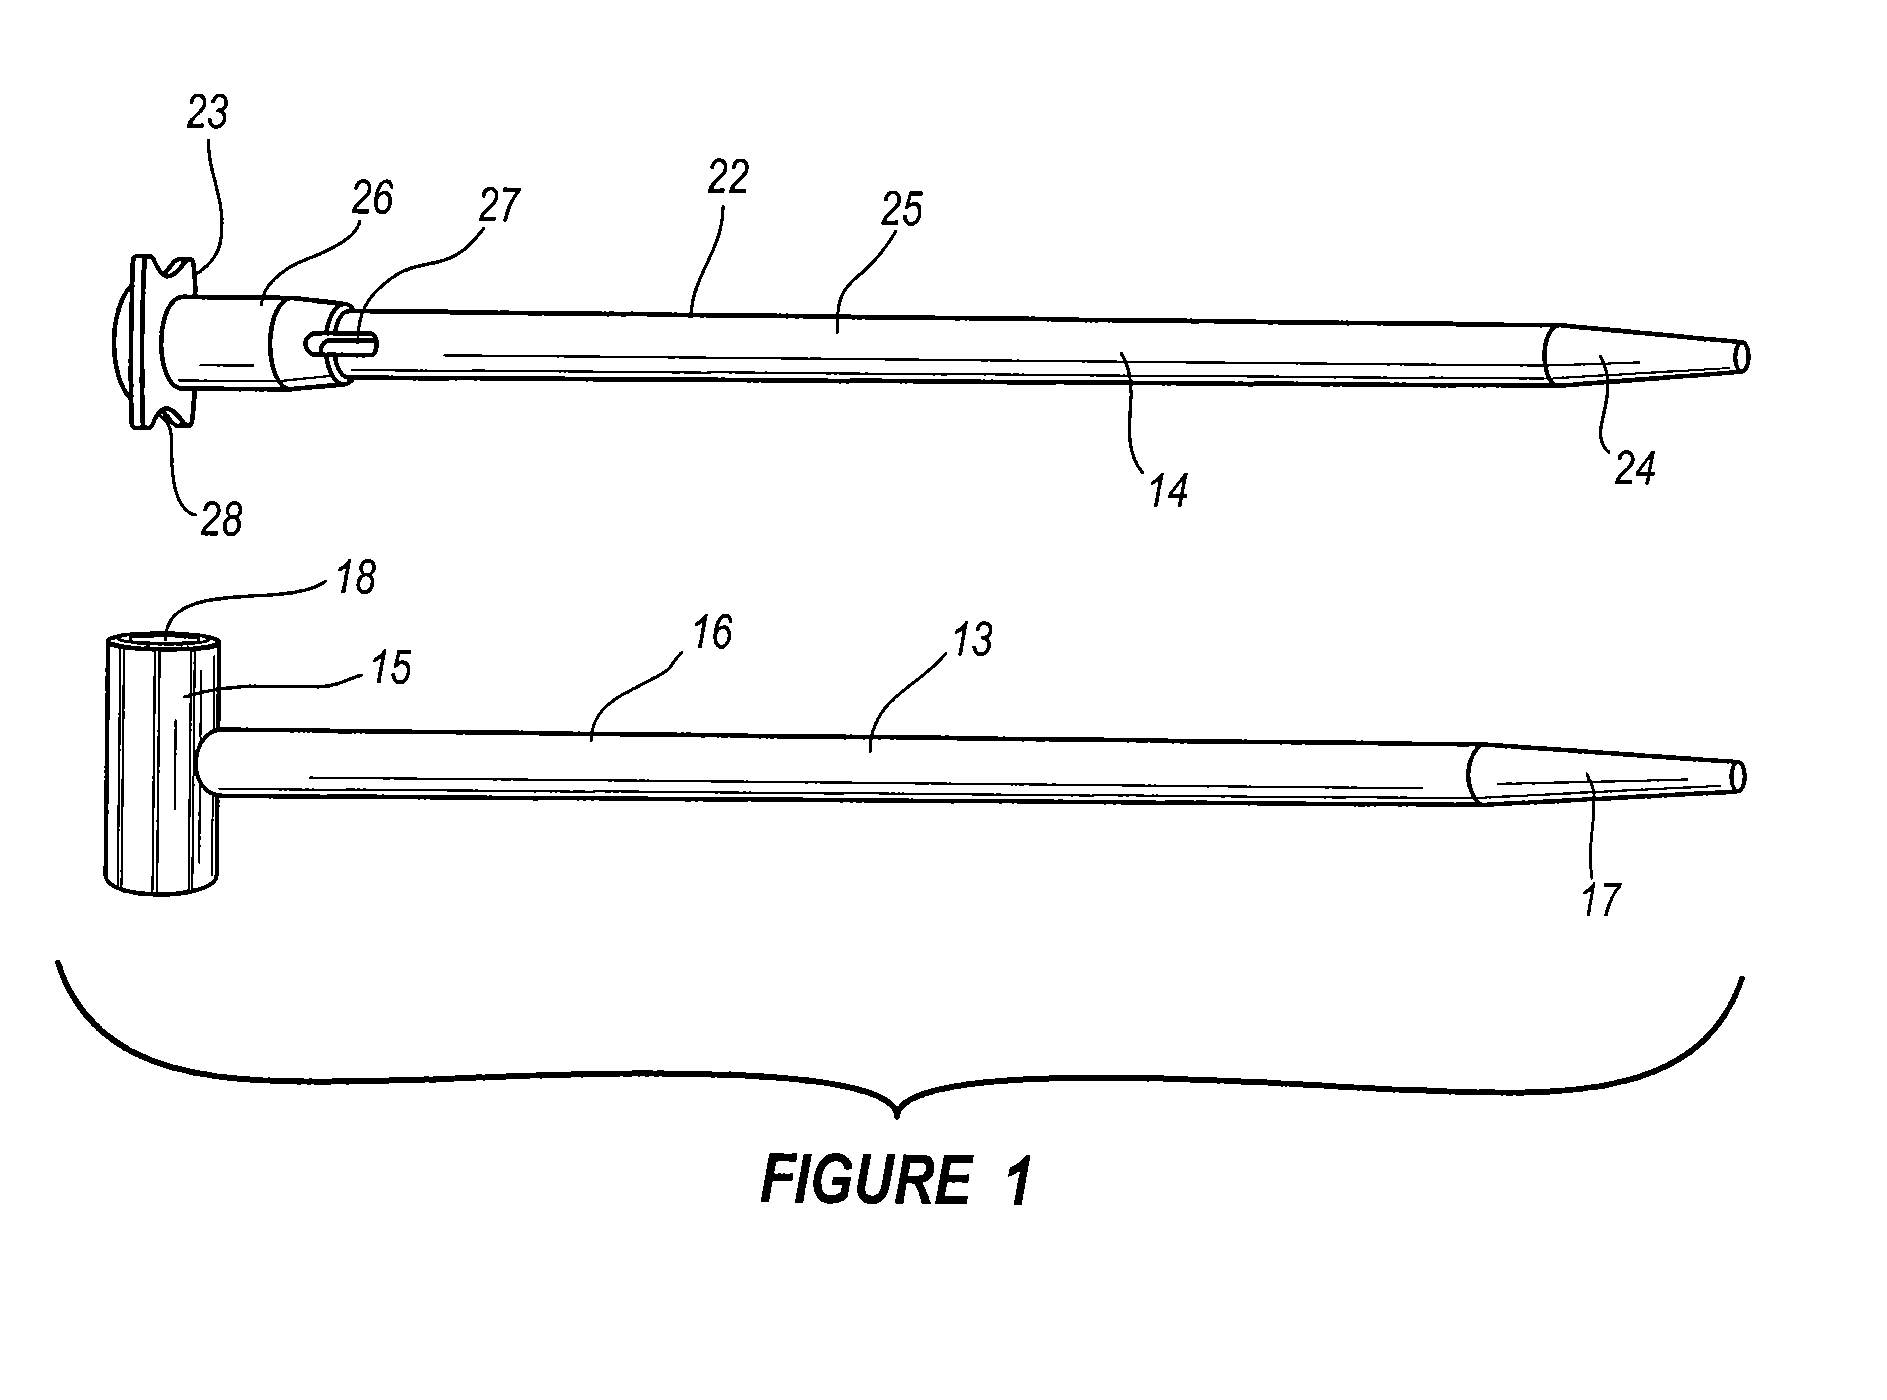 Systems and methods for guiding cuts to a femur and tibia during a knee arthroplasty